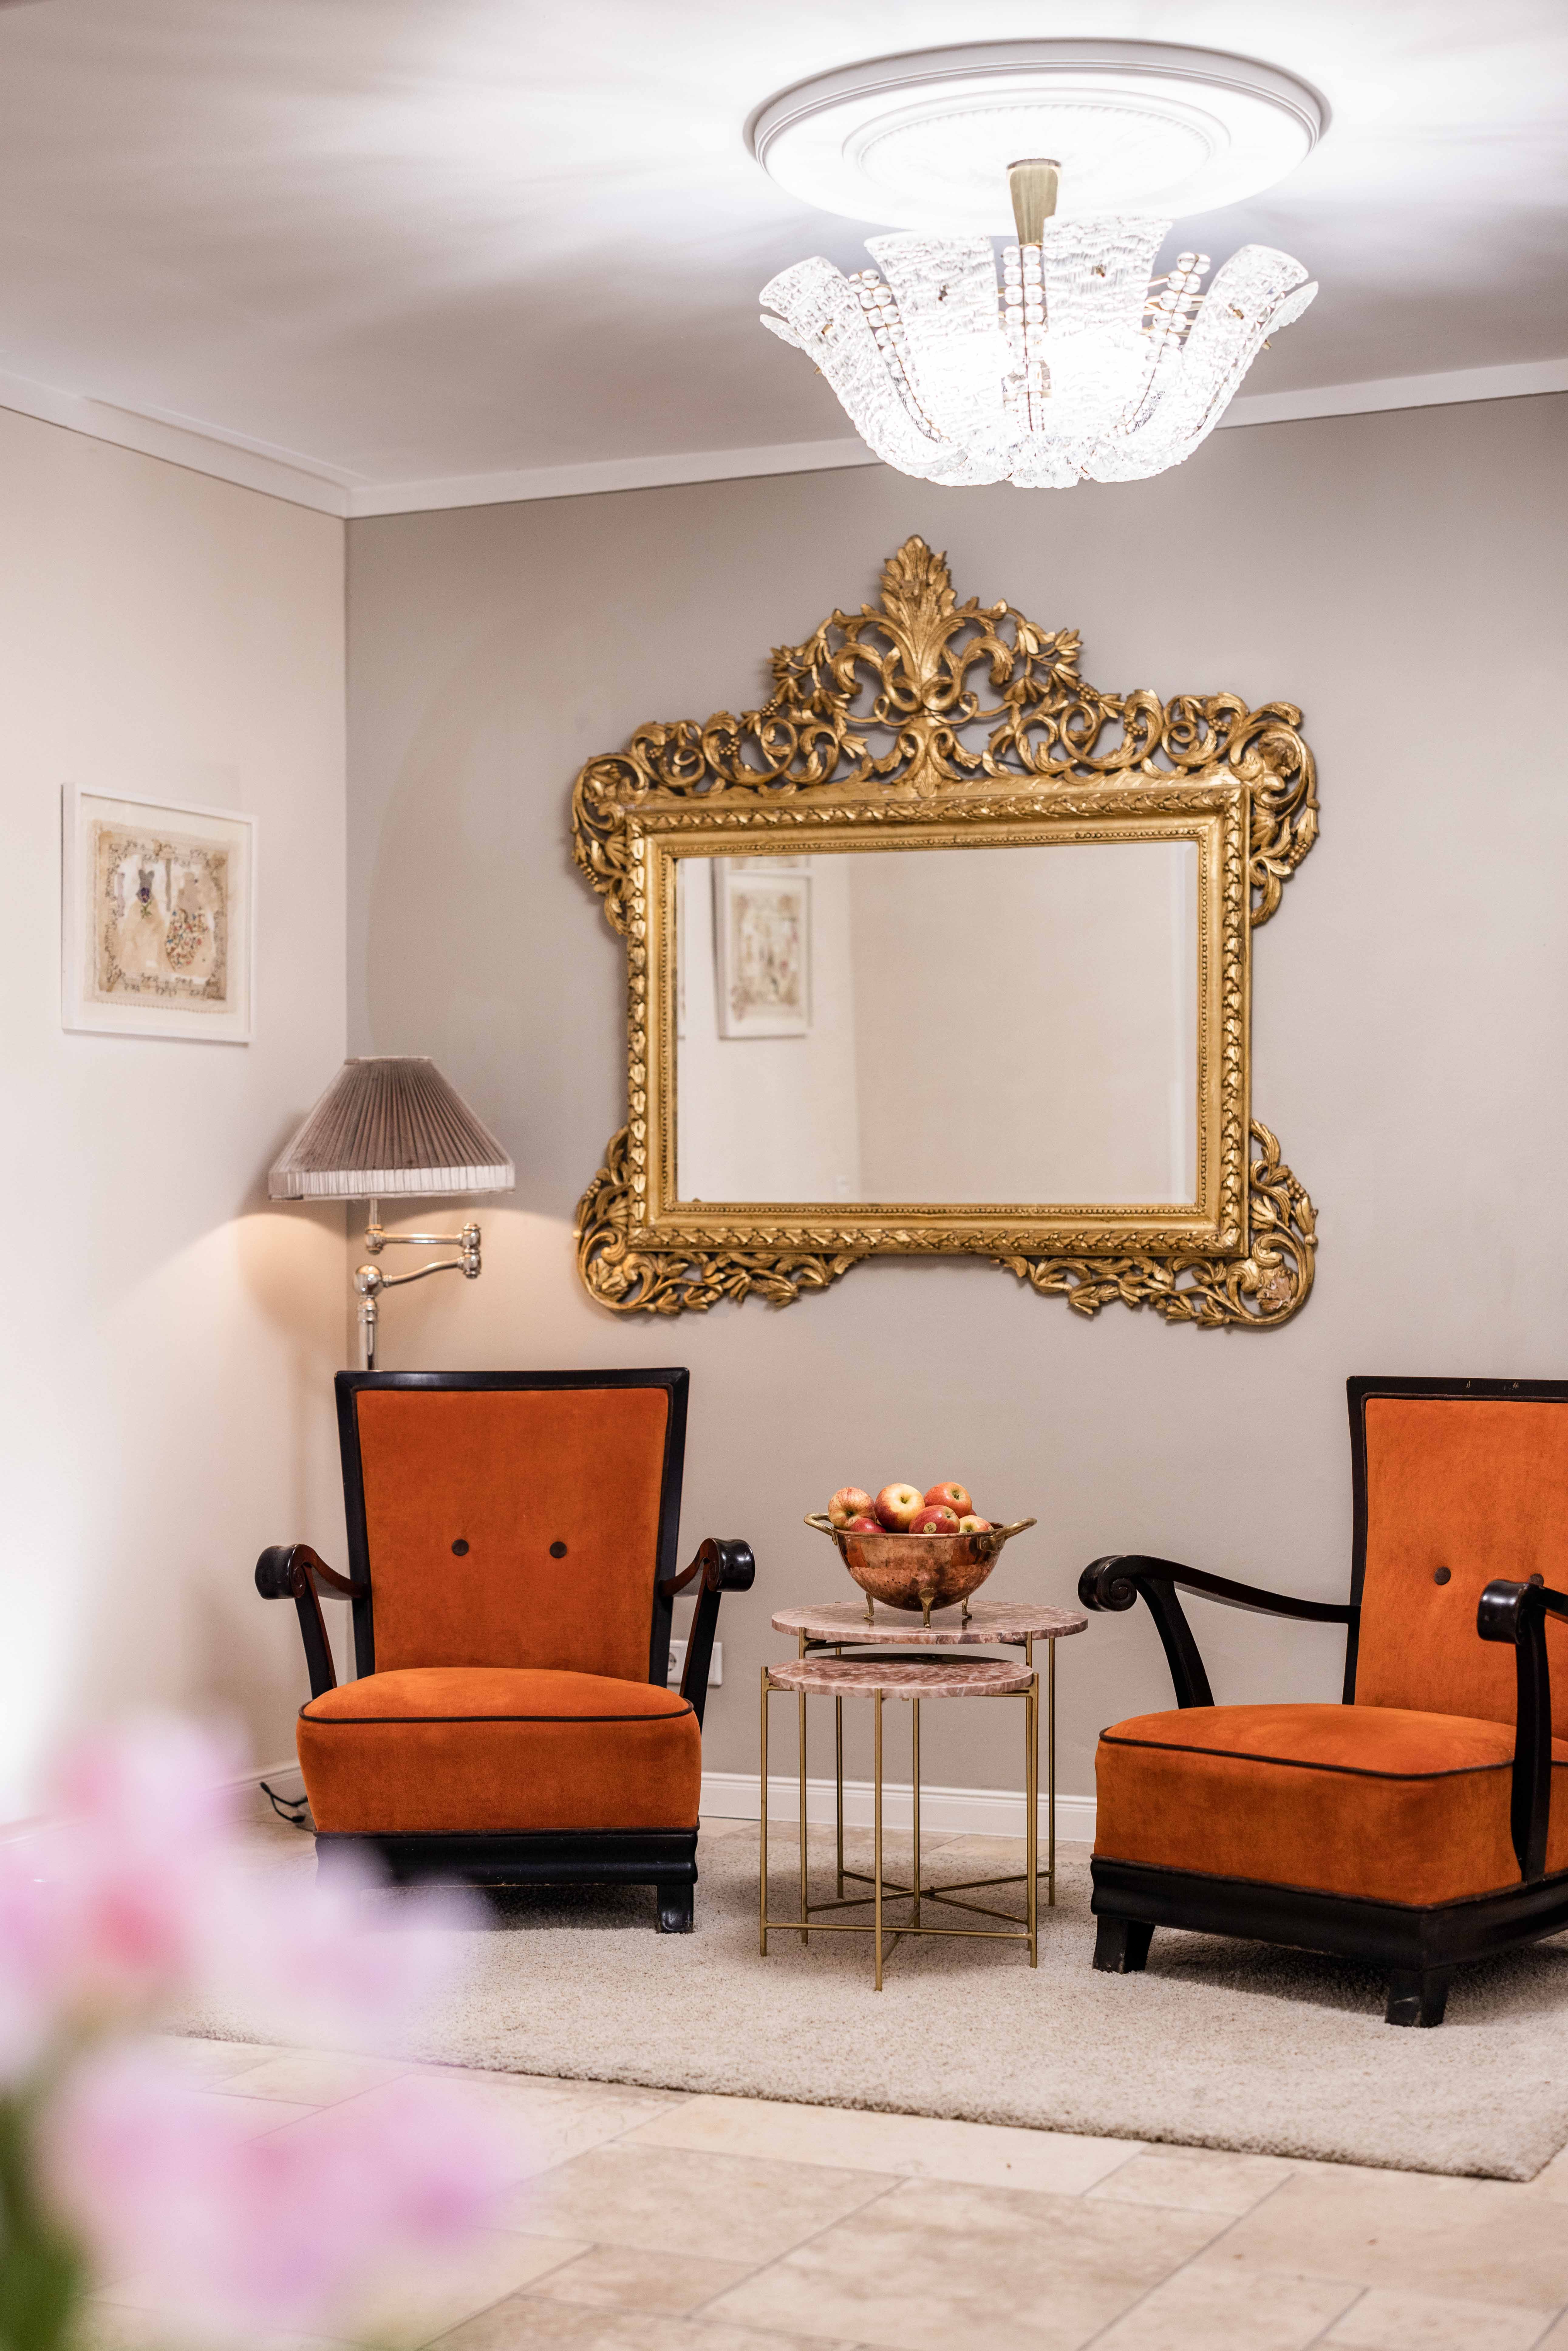 Elegant hotel lobby with orange upholstered armchairs and a gold mirror on the wall